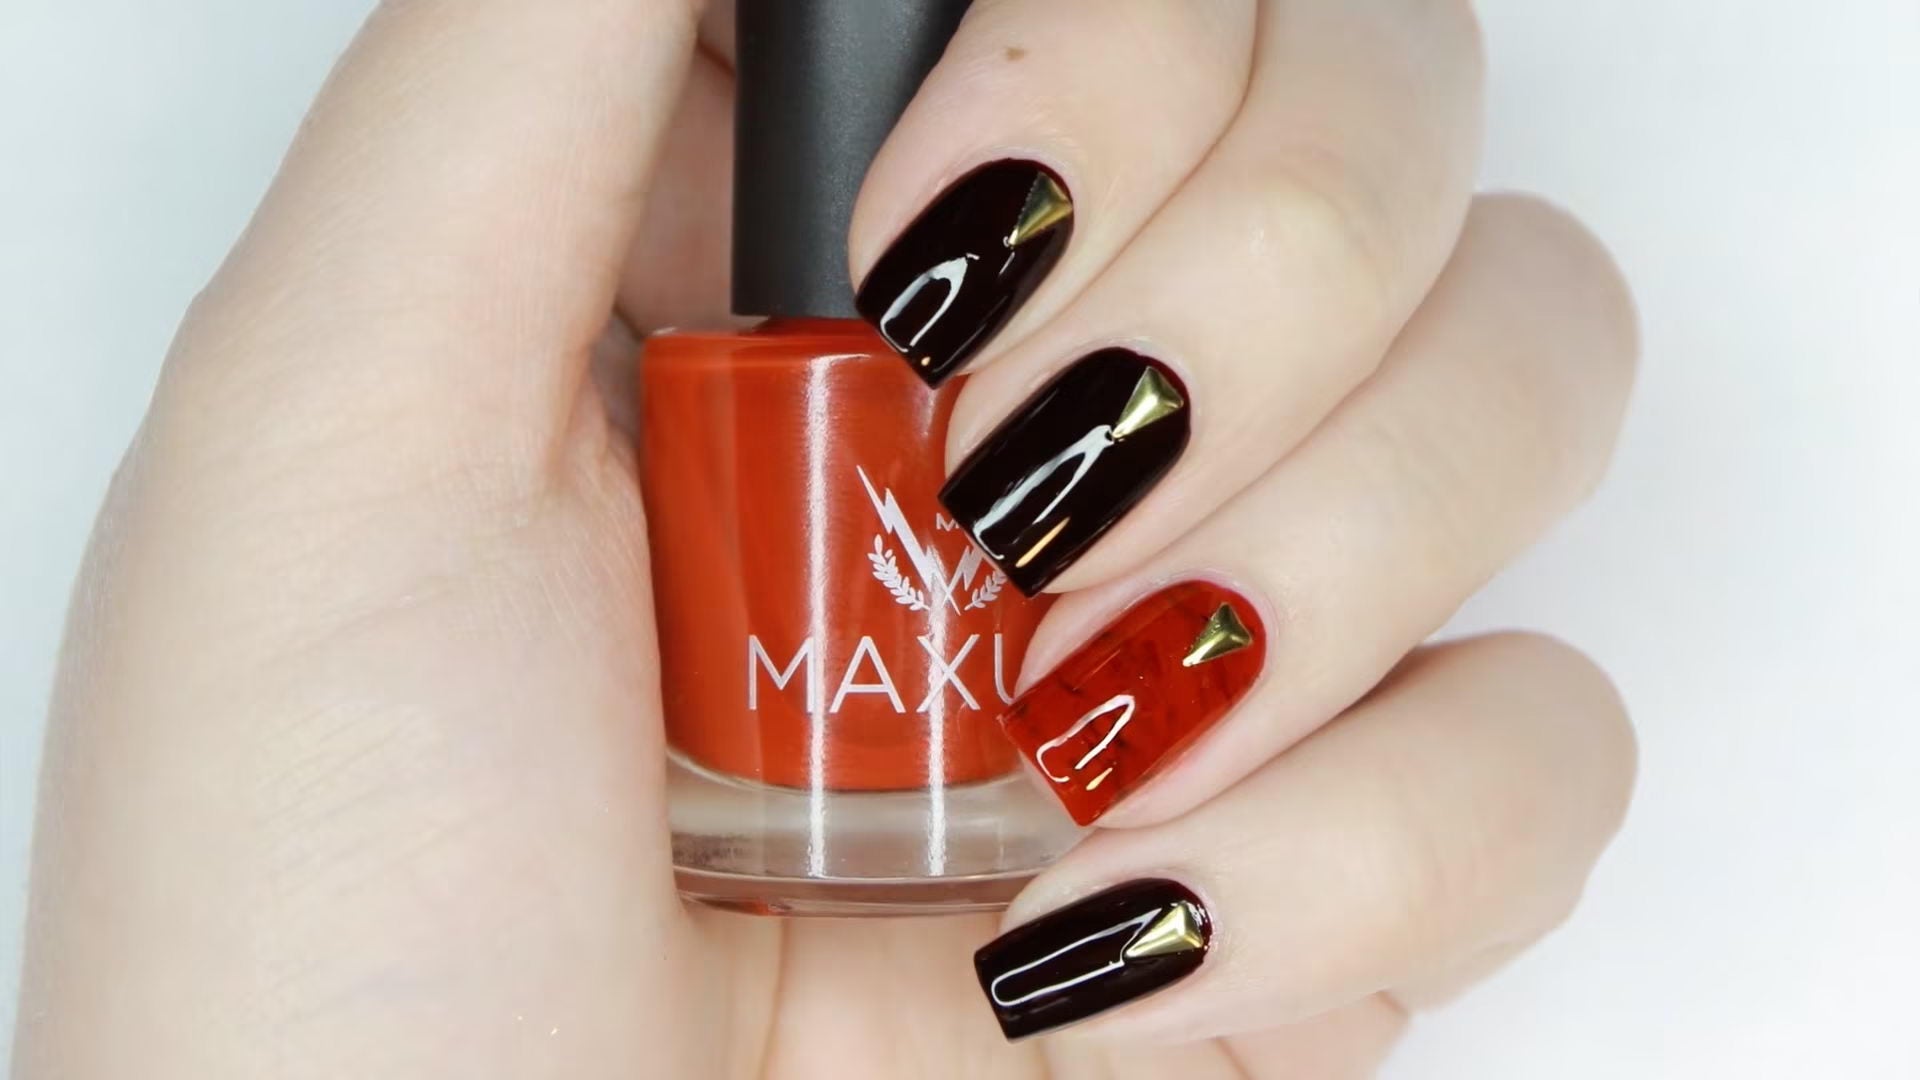 Maxus Mani using Respected and Inspired from the Empower Collection.